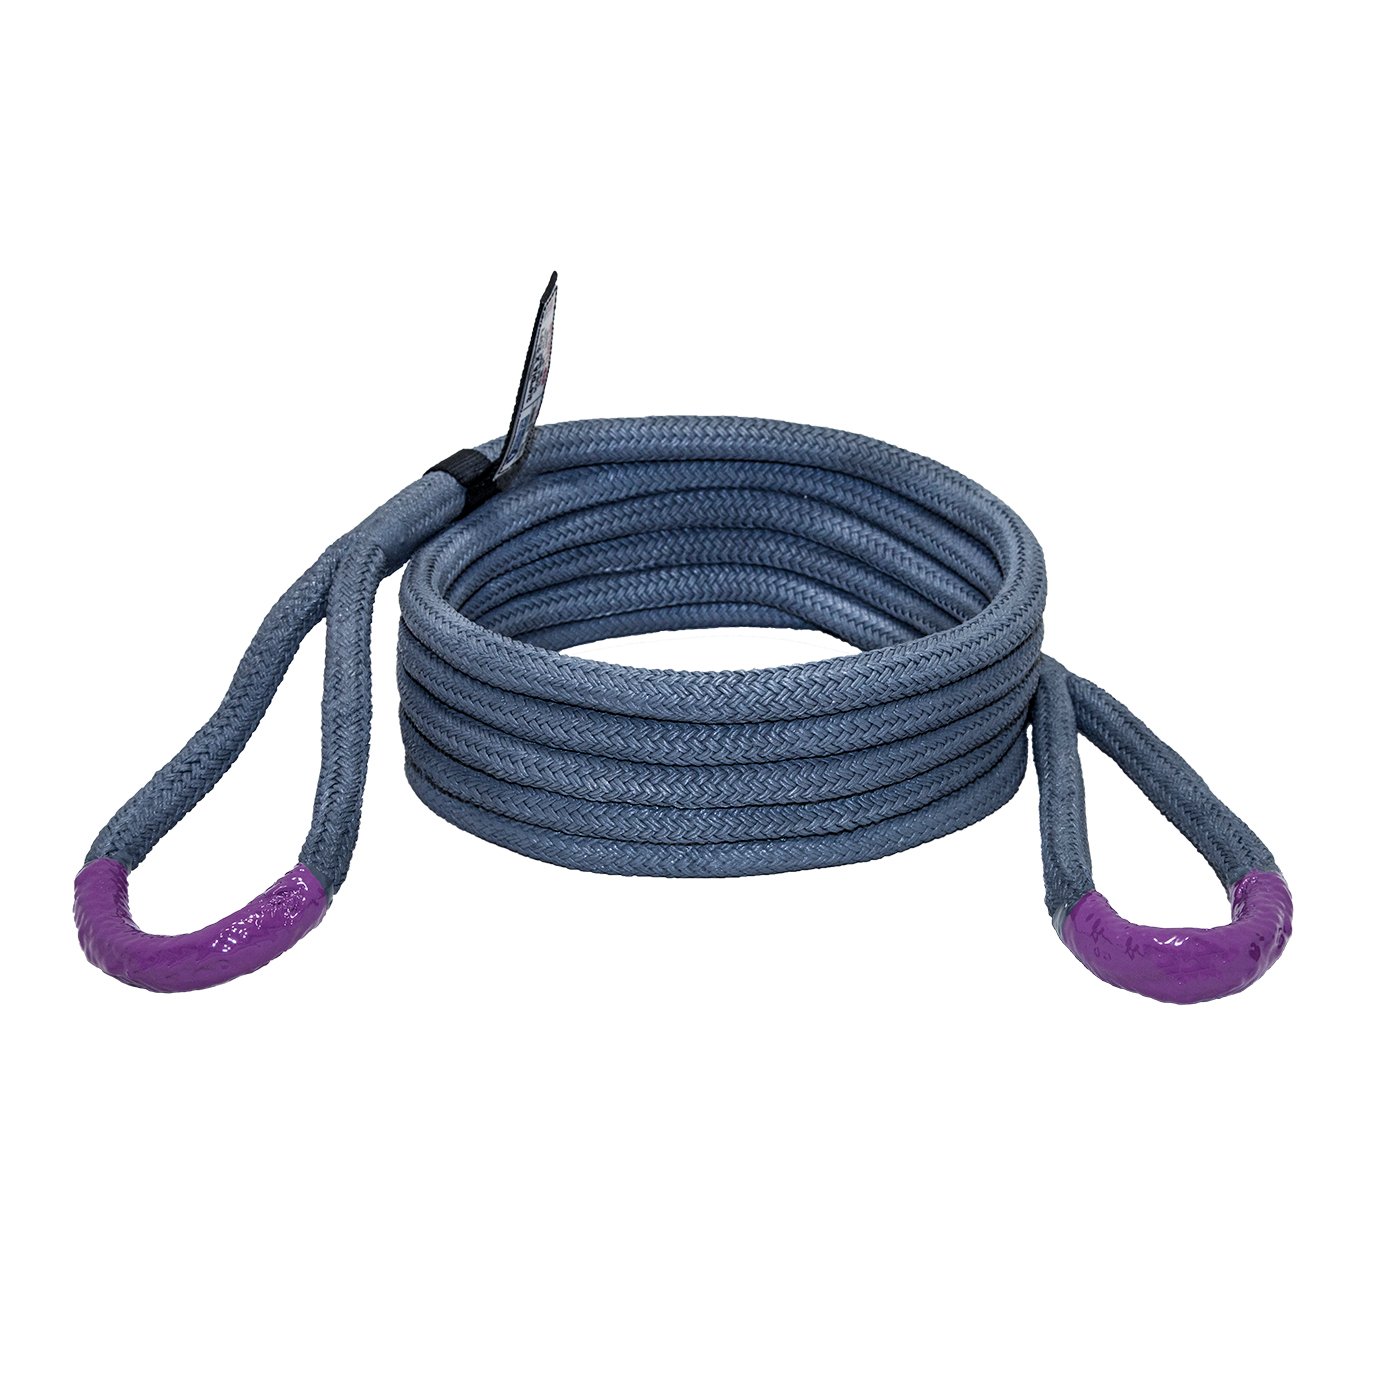 Kinetic Recovery Rope, 7/8 in. Diameter, 28,000 Psi Rating, 30 Feet Long